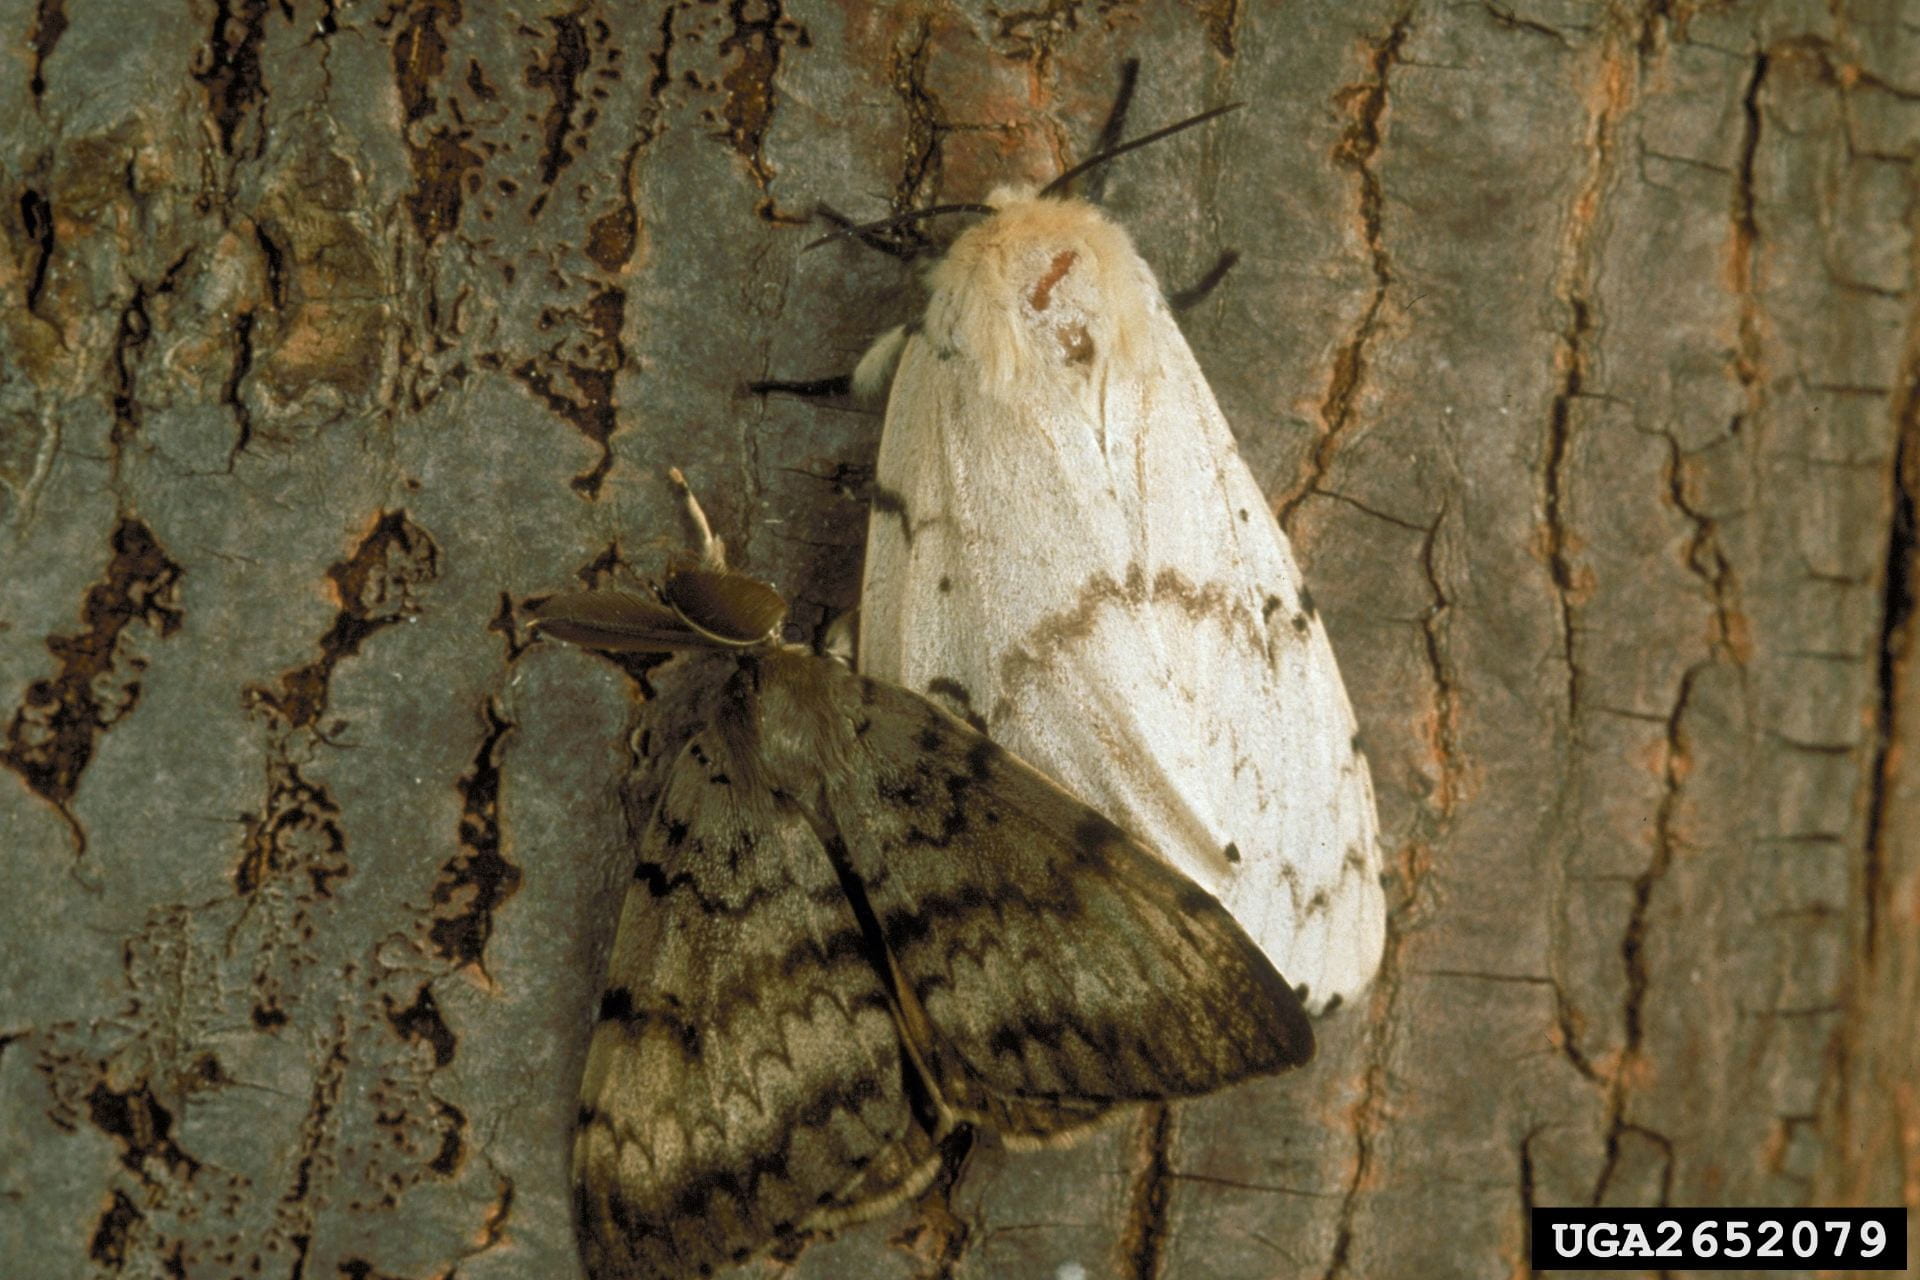 photo shows adult gypsy moths. Male is dark and female is light colored.